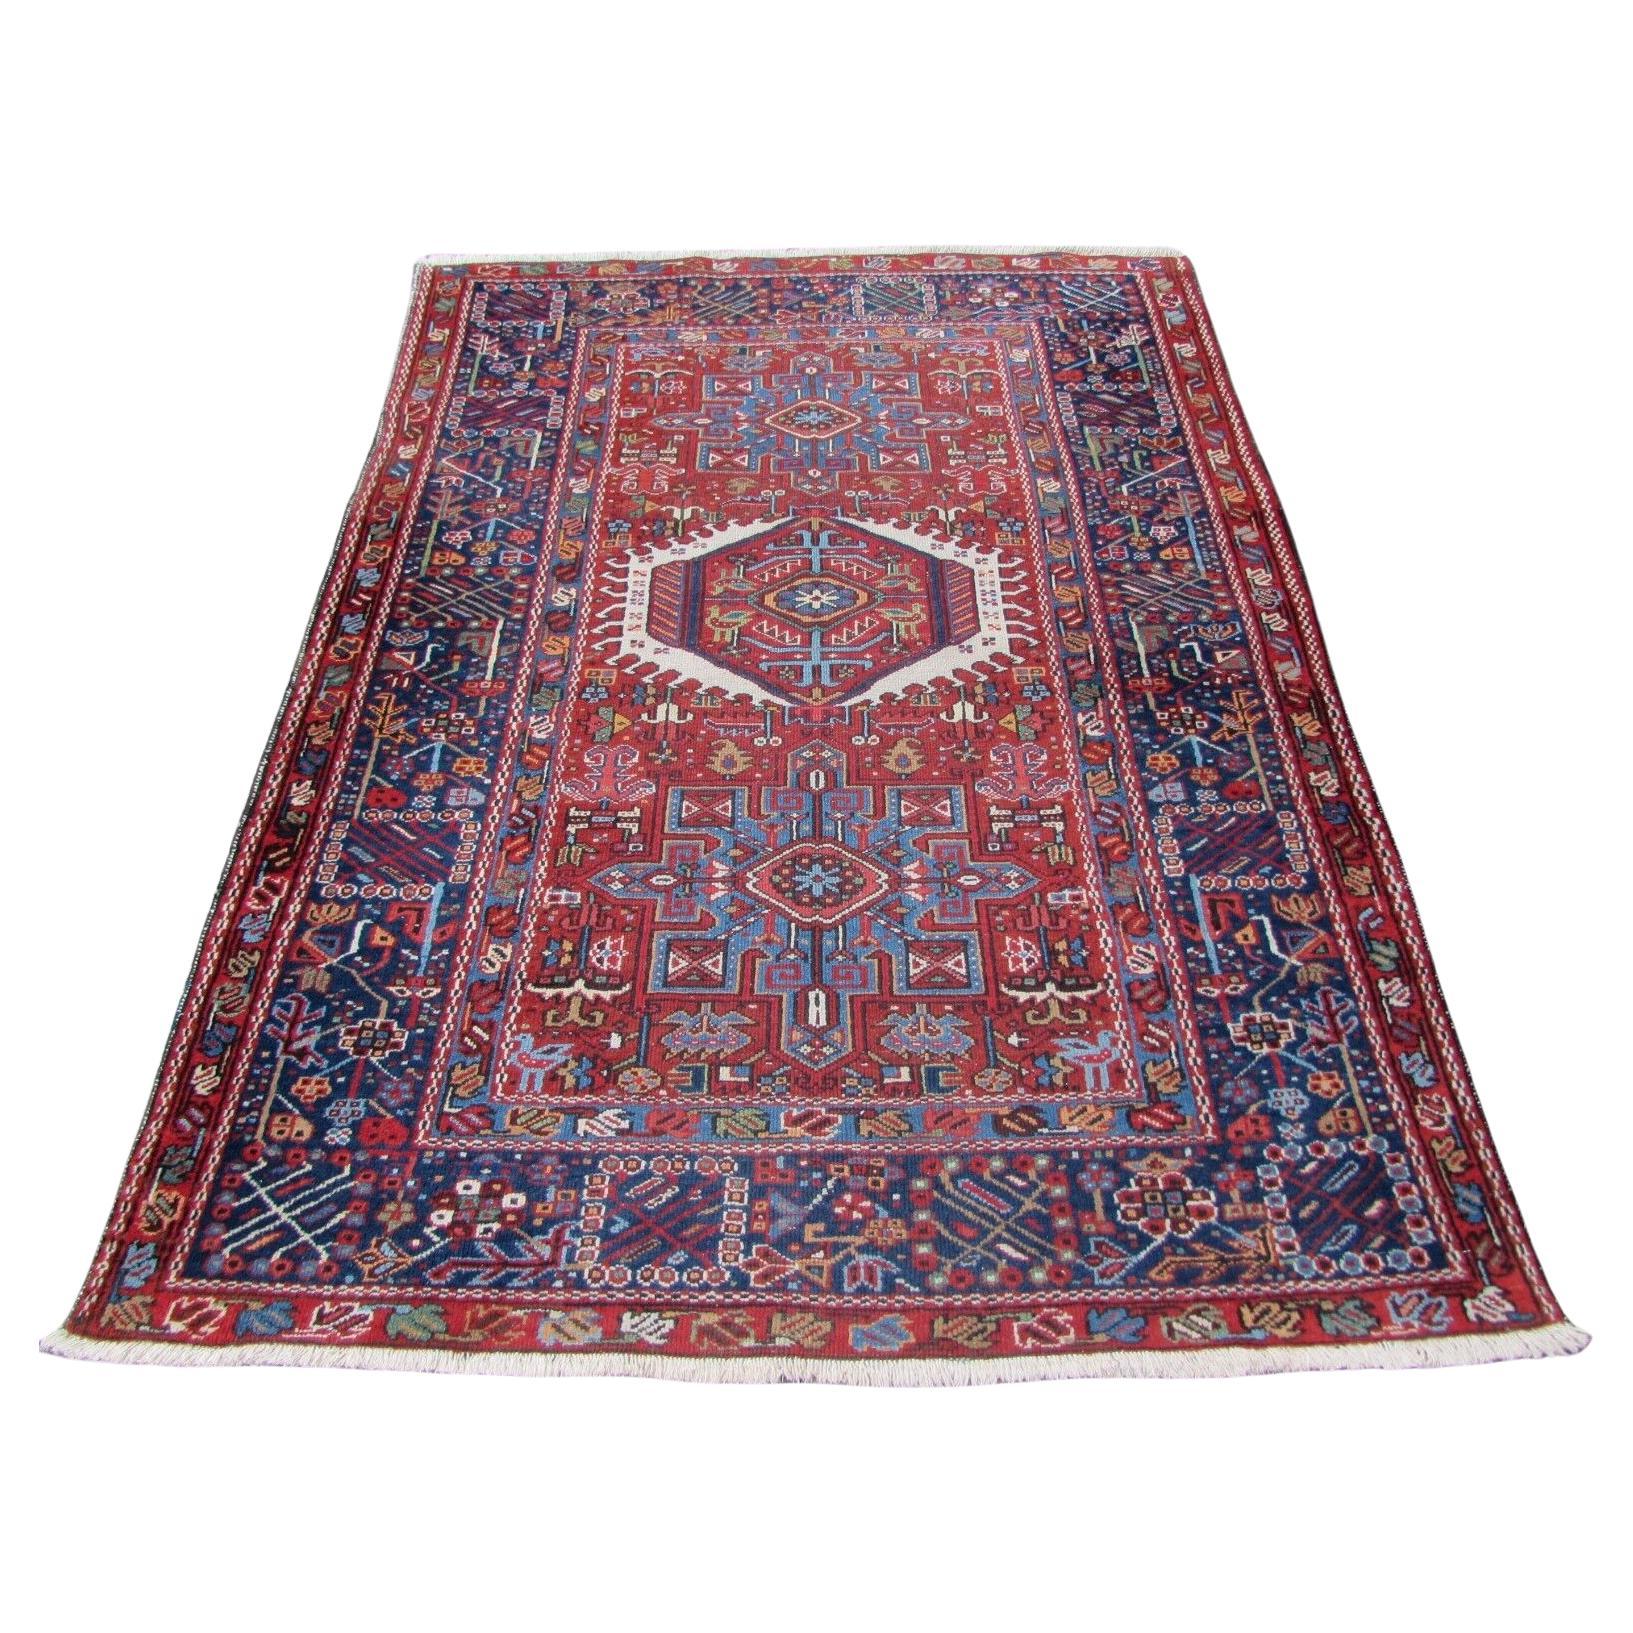  Handmade Antique Persian Style Karajeh Rug 4.6' x 6', 1920s - 1Q56 For Sale